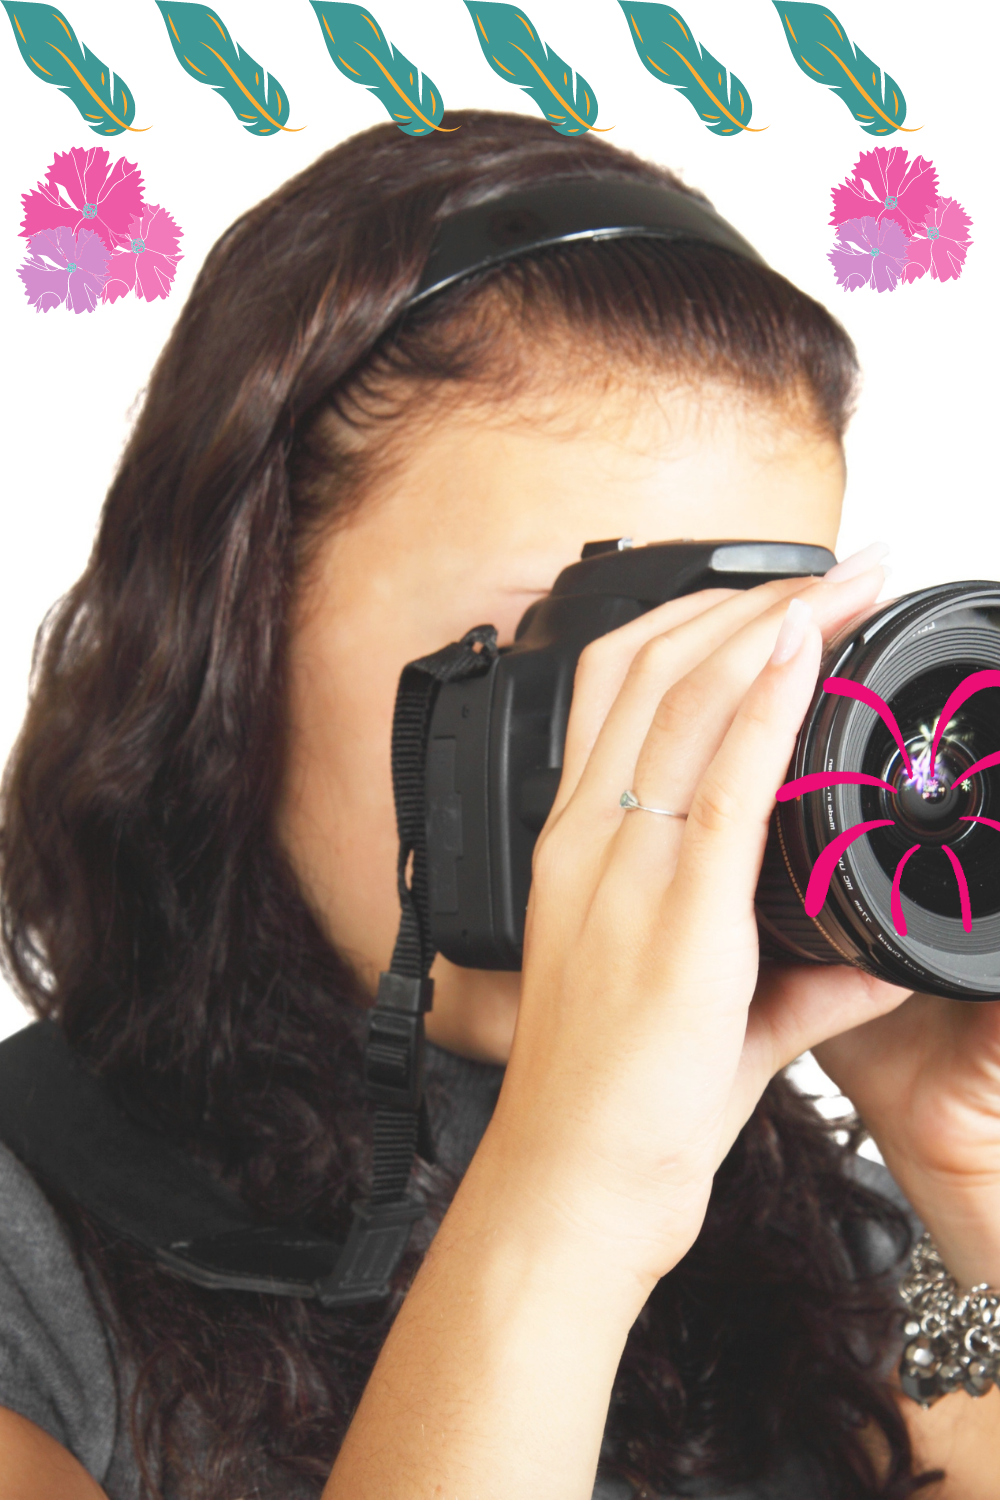 What To Look In DSLR Camera Before Buying